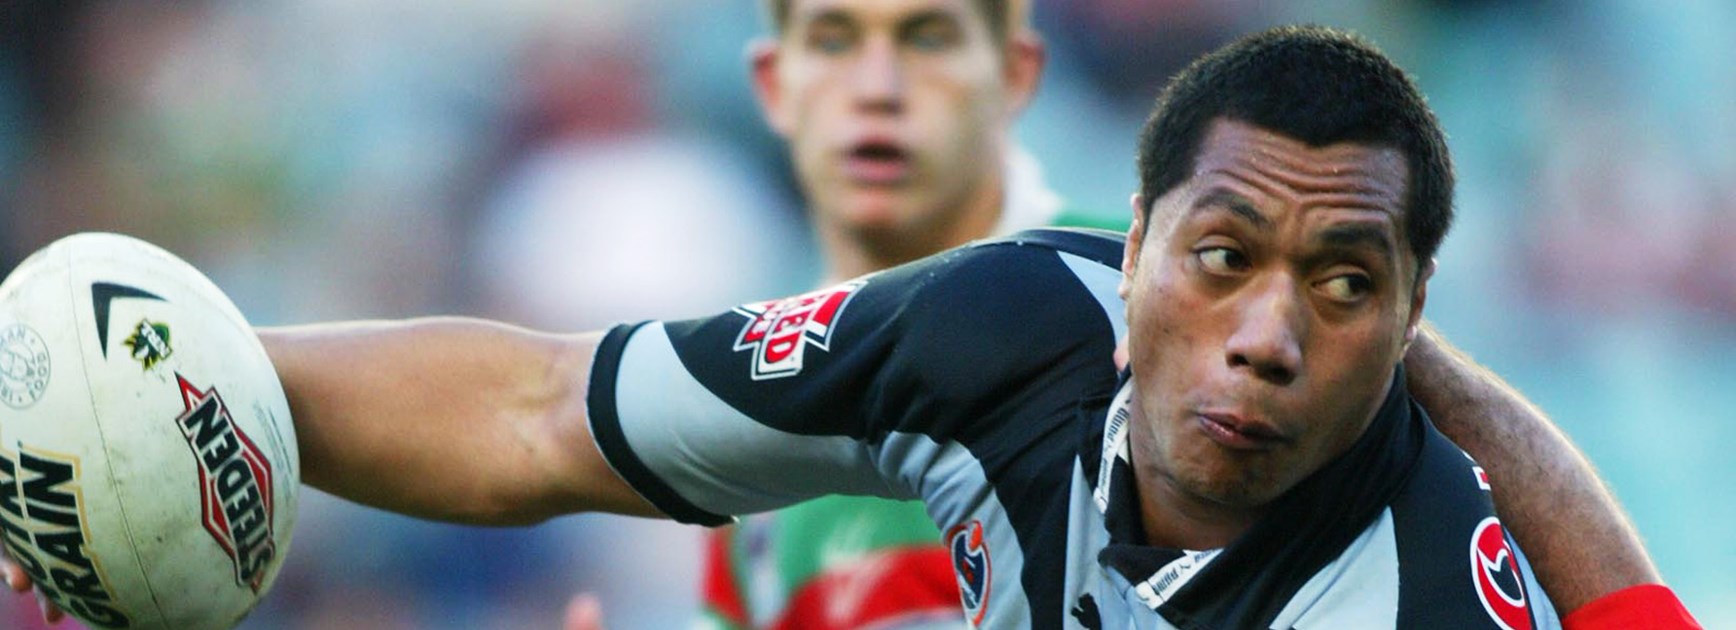 Sione Faumuina was one of the most damaging forwards in the game in 2003 during his stint with the Warriors.